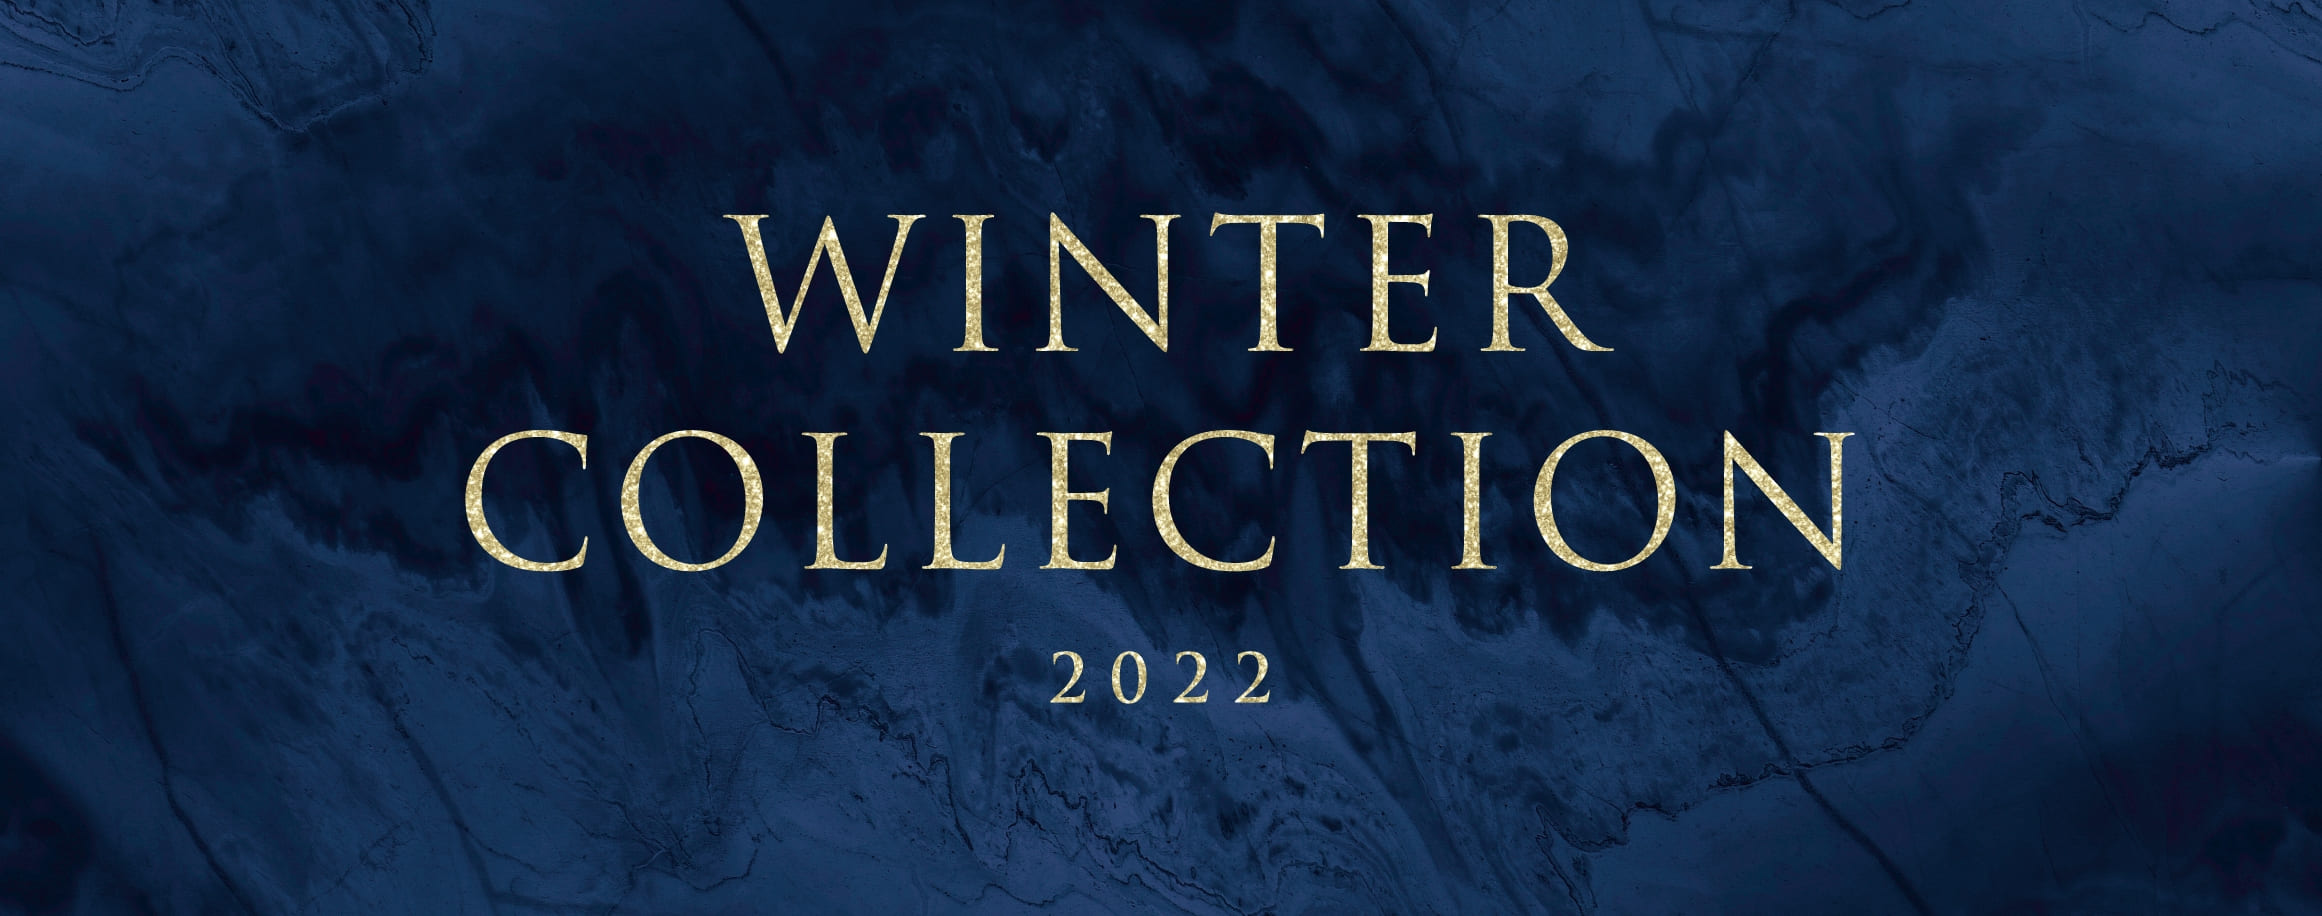 WINTER COLLECTION 2022